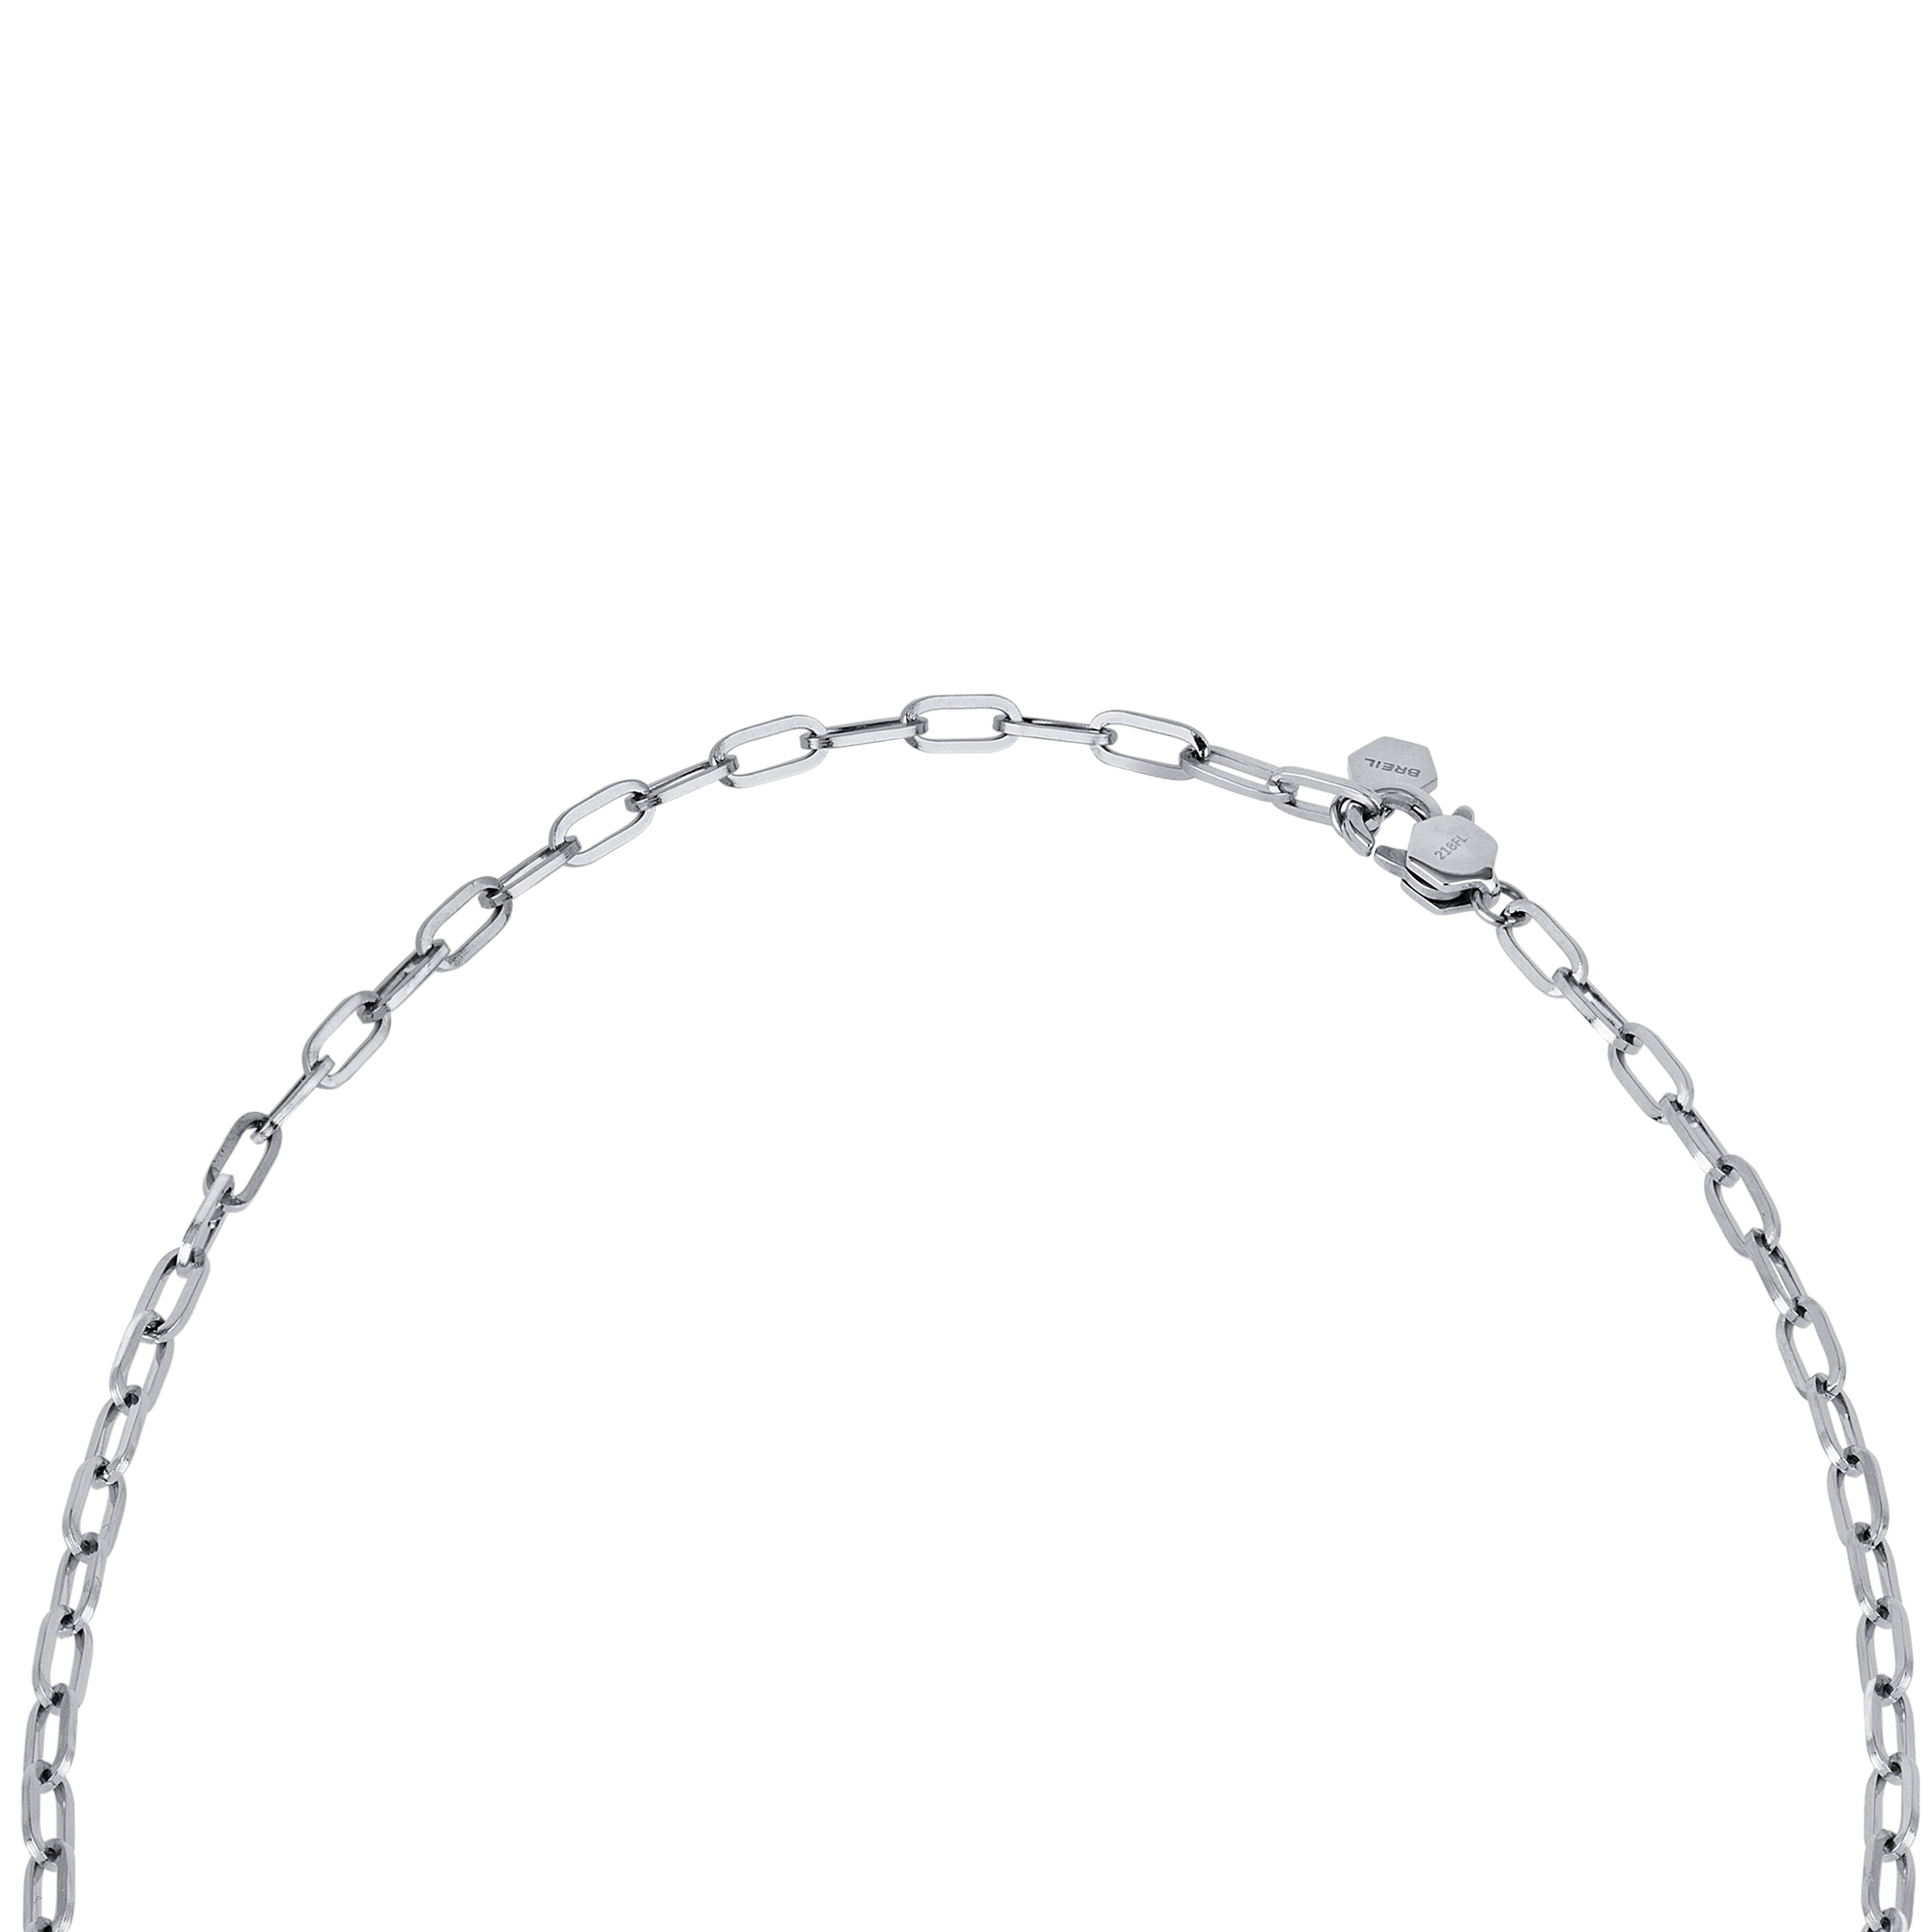 PRIVATE CODE - STAINLESS STEEL NECKLACE - 2 - TJ3121 | Breil